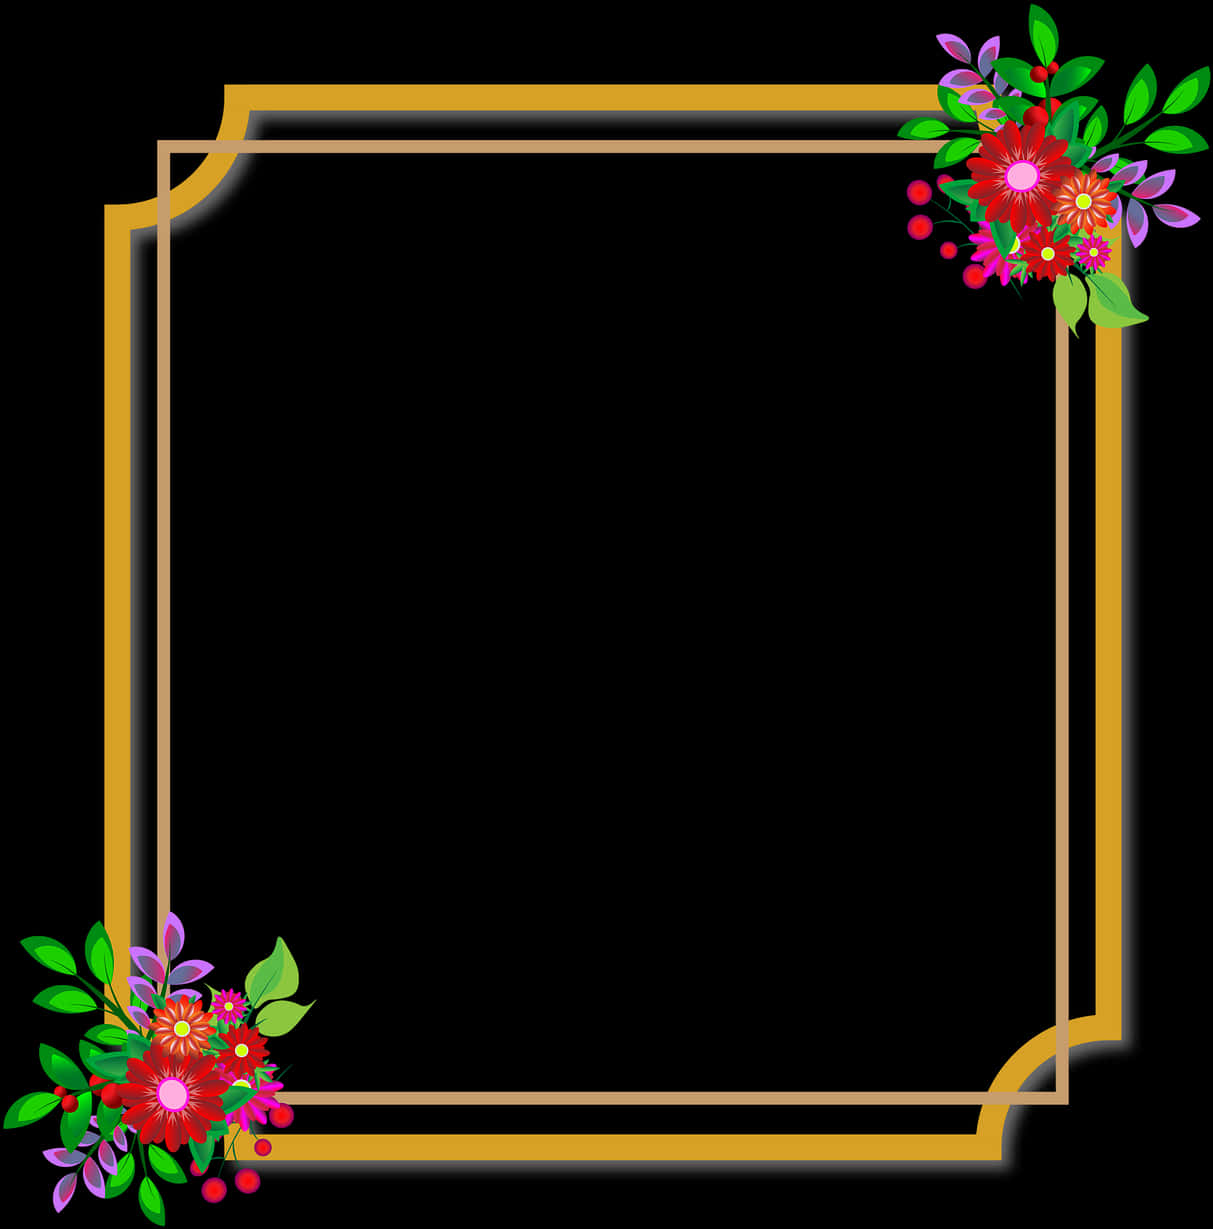 A Gold Frame With Flowers And Leaves On It